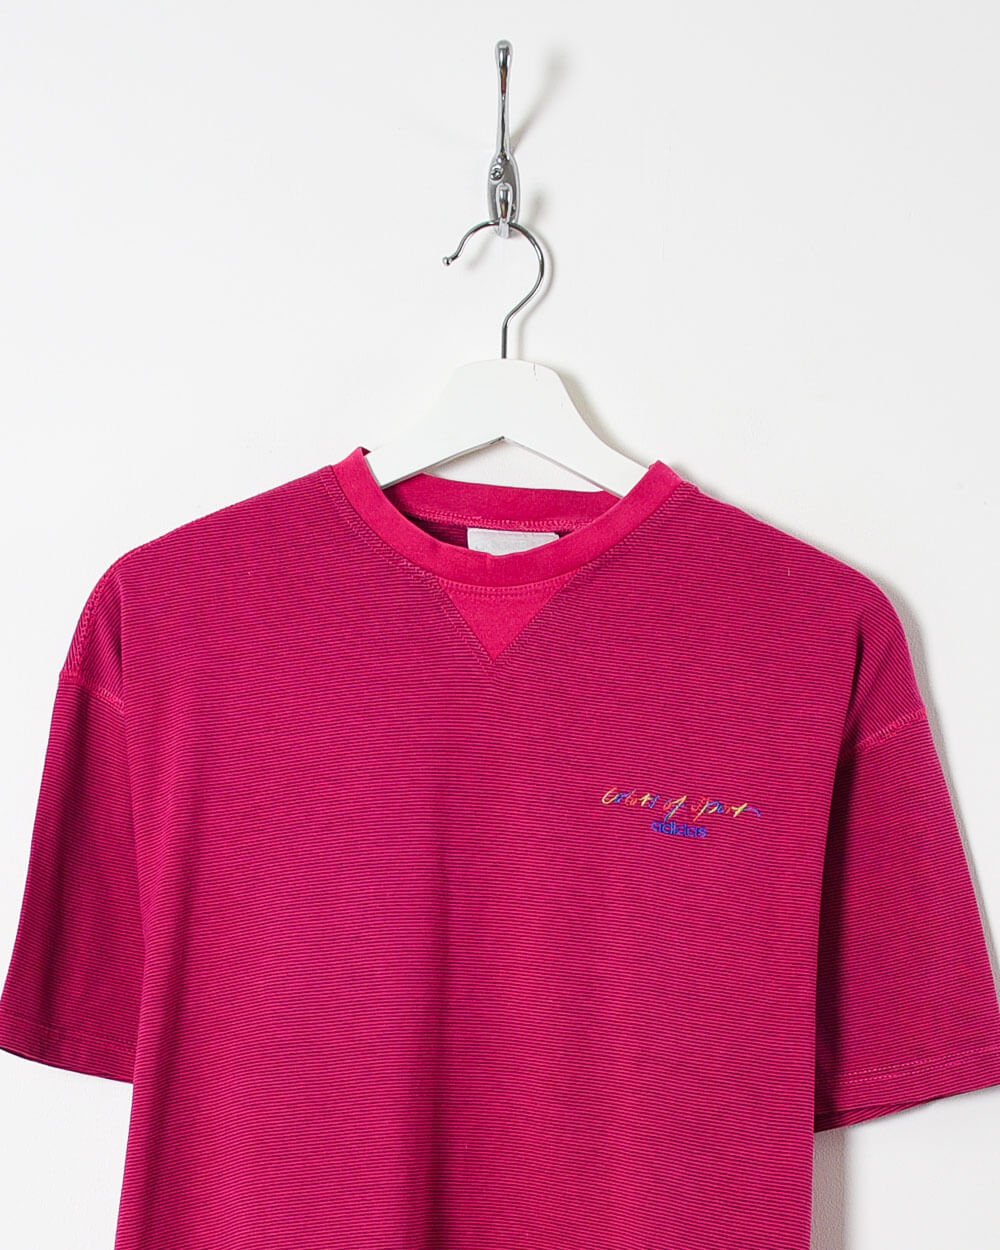 Adidas Colours of Sport T-Shirt - Small - Domno Vintage 90s, 80s, 00s Retro and Vintage Clothing 